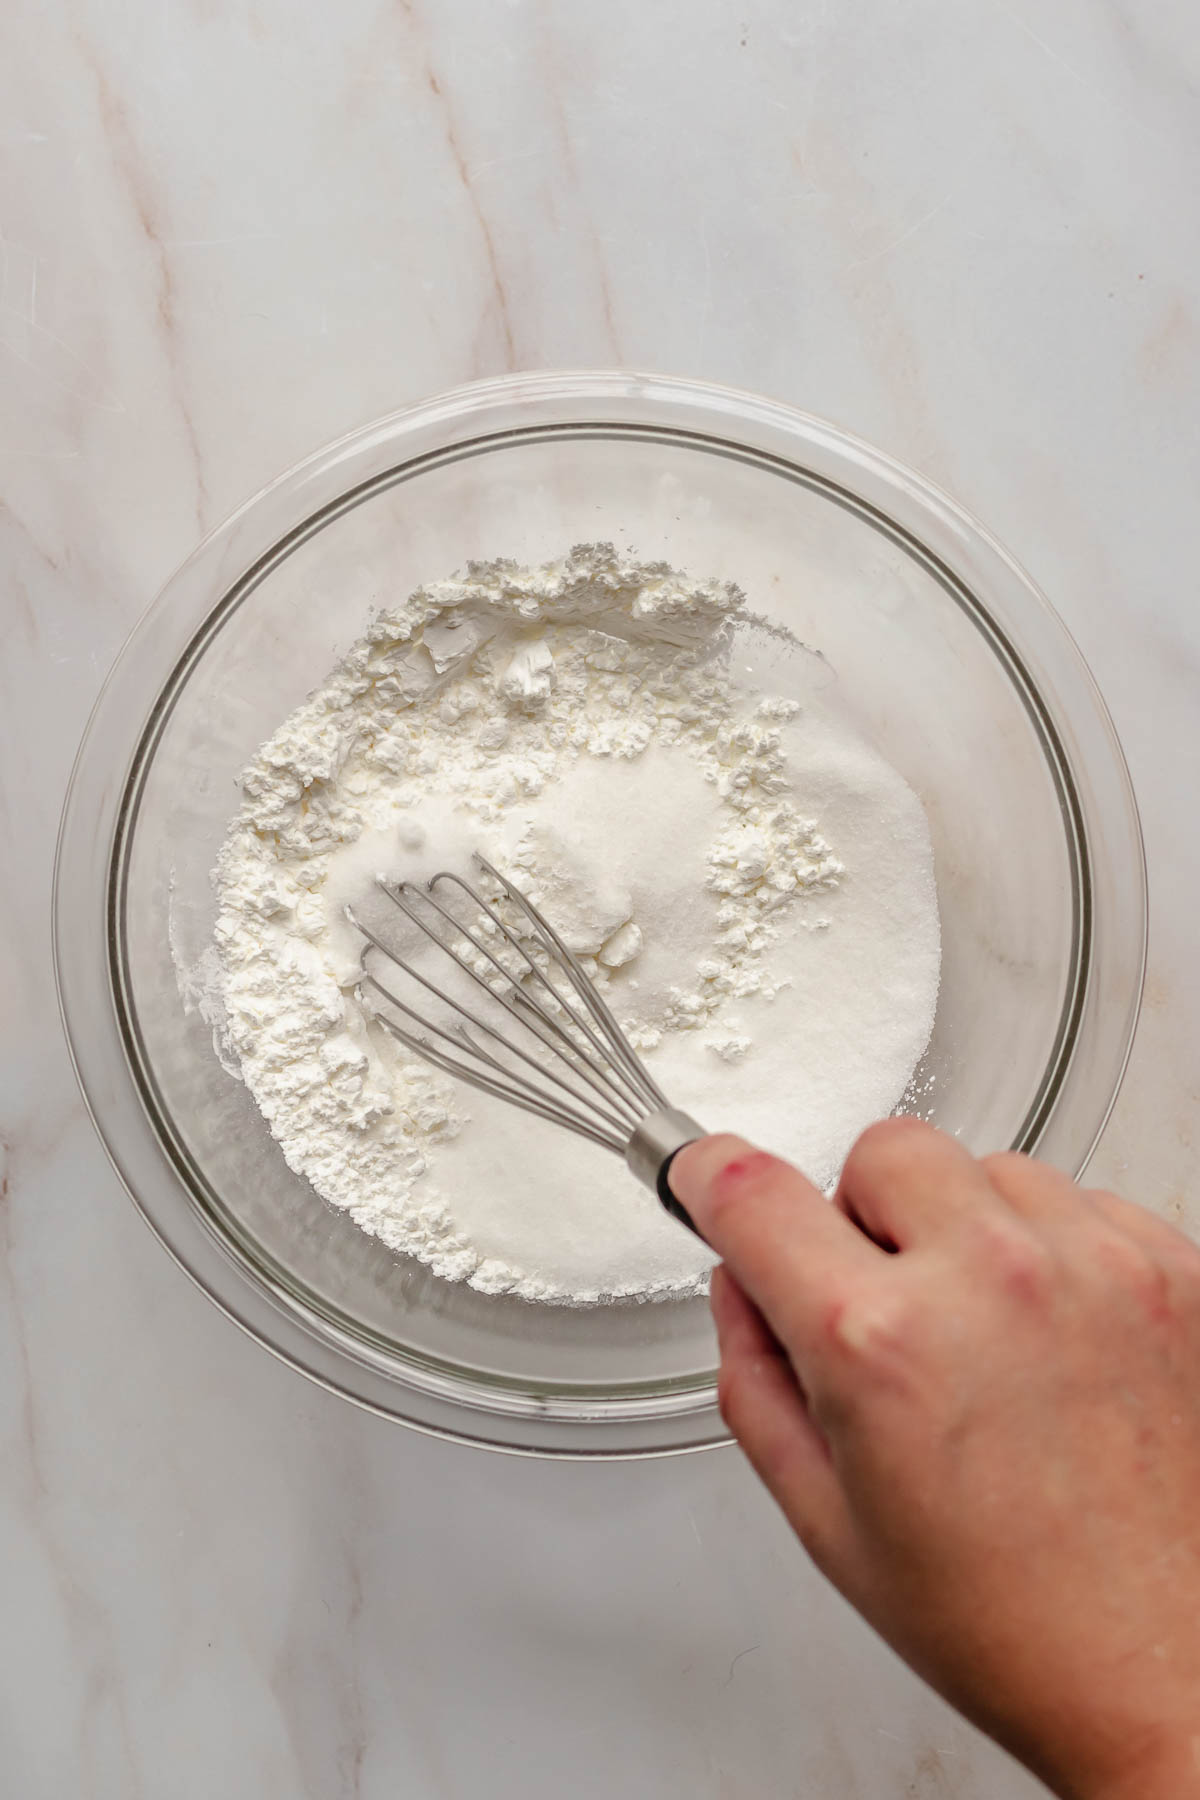 A hand whisks sugar and corn starch in a bowl.